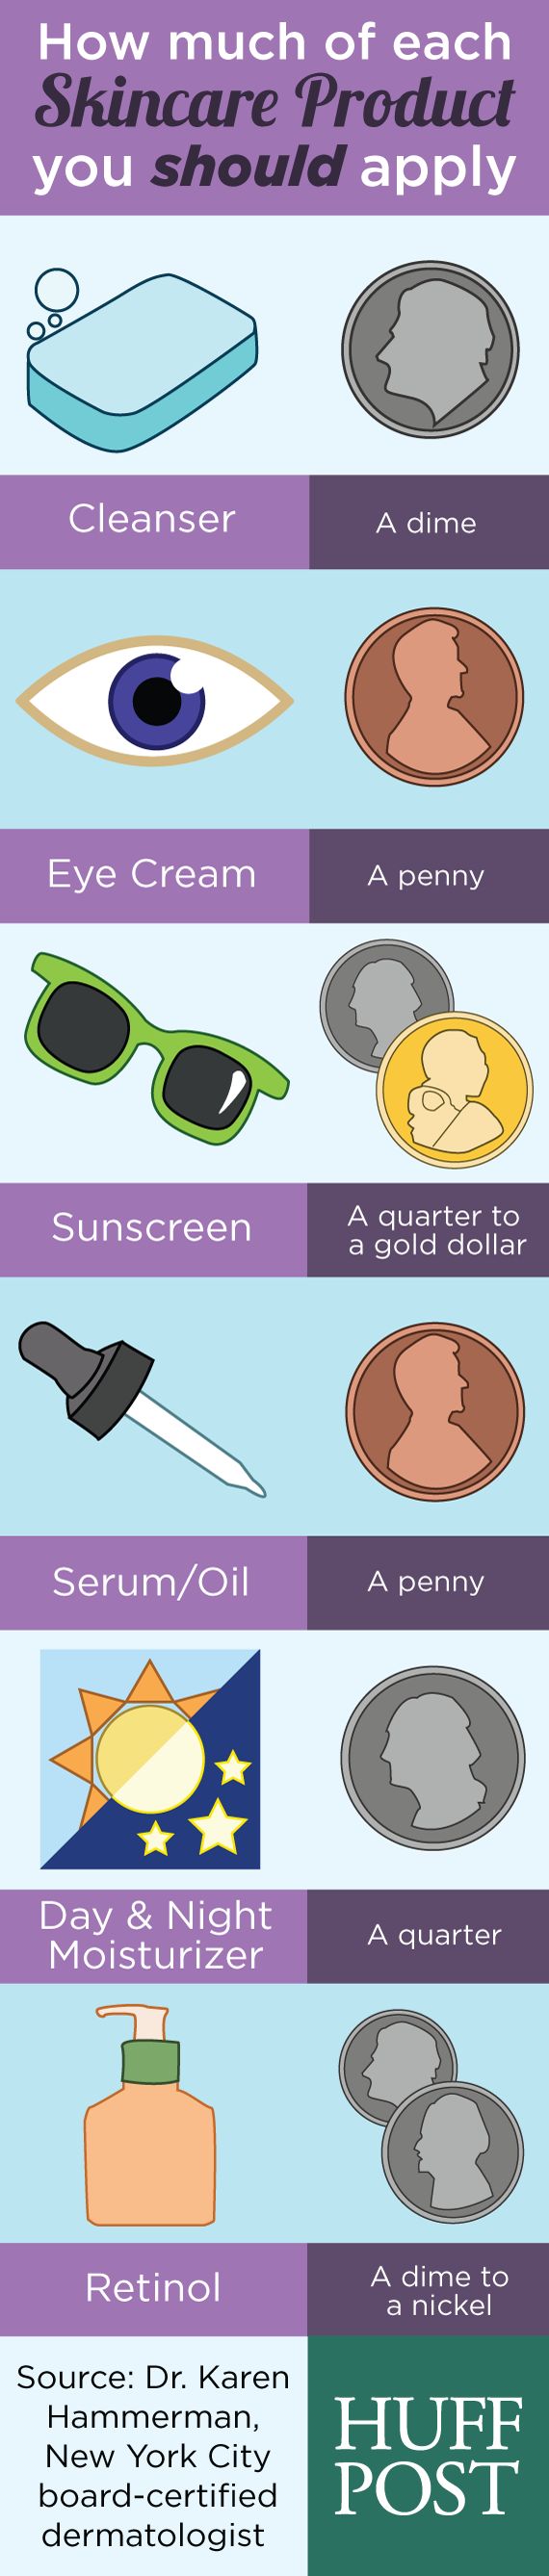 Here is a handy guide on how much of each skincare product you should apply.